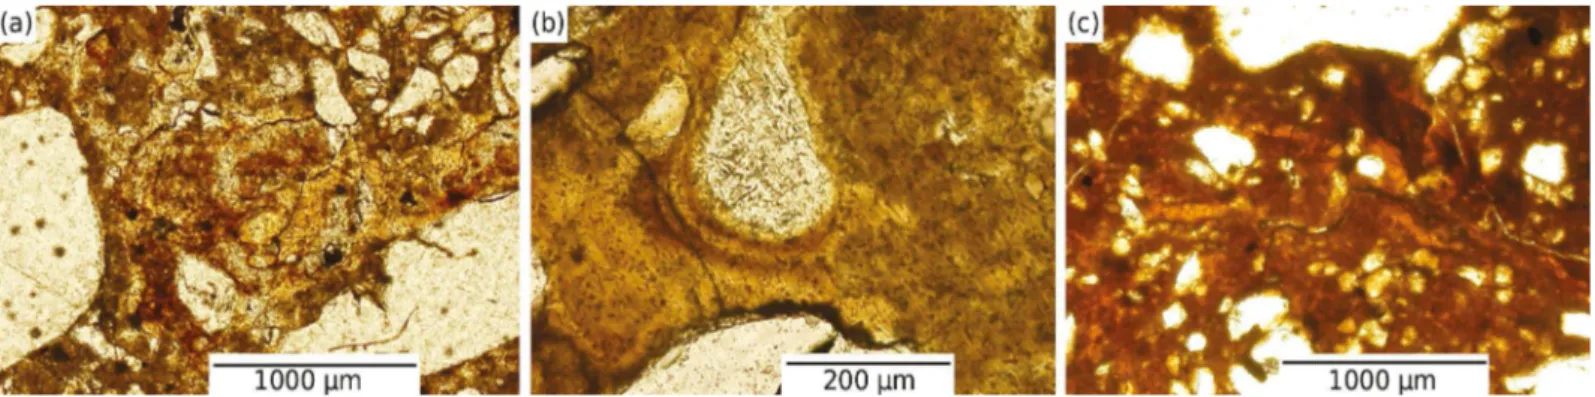 Figure 4. Micrographs (under planar polarized light) of selected micromorphological features from Btgm cemented horizons